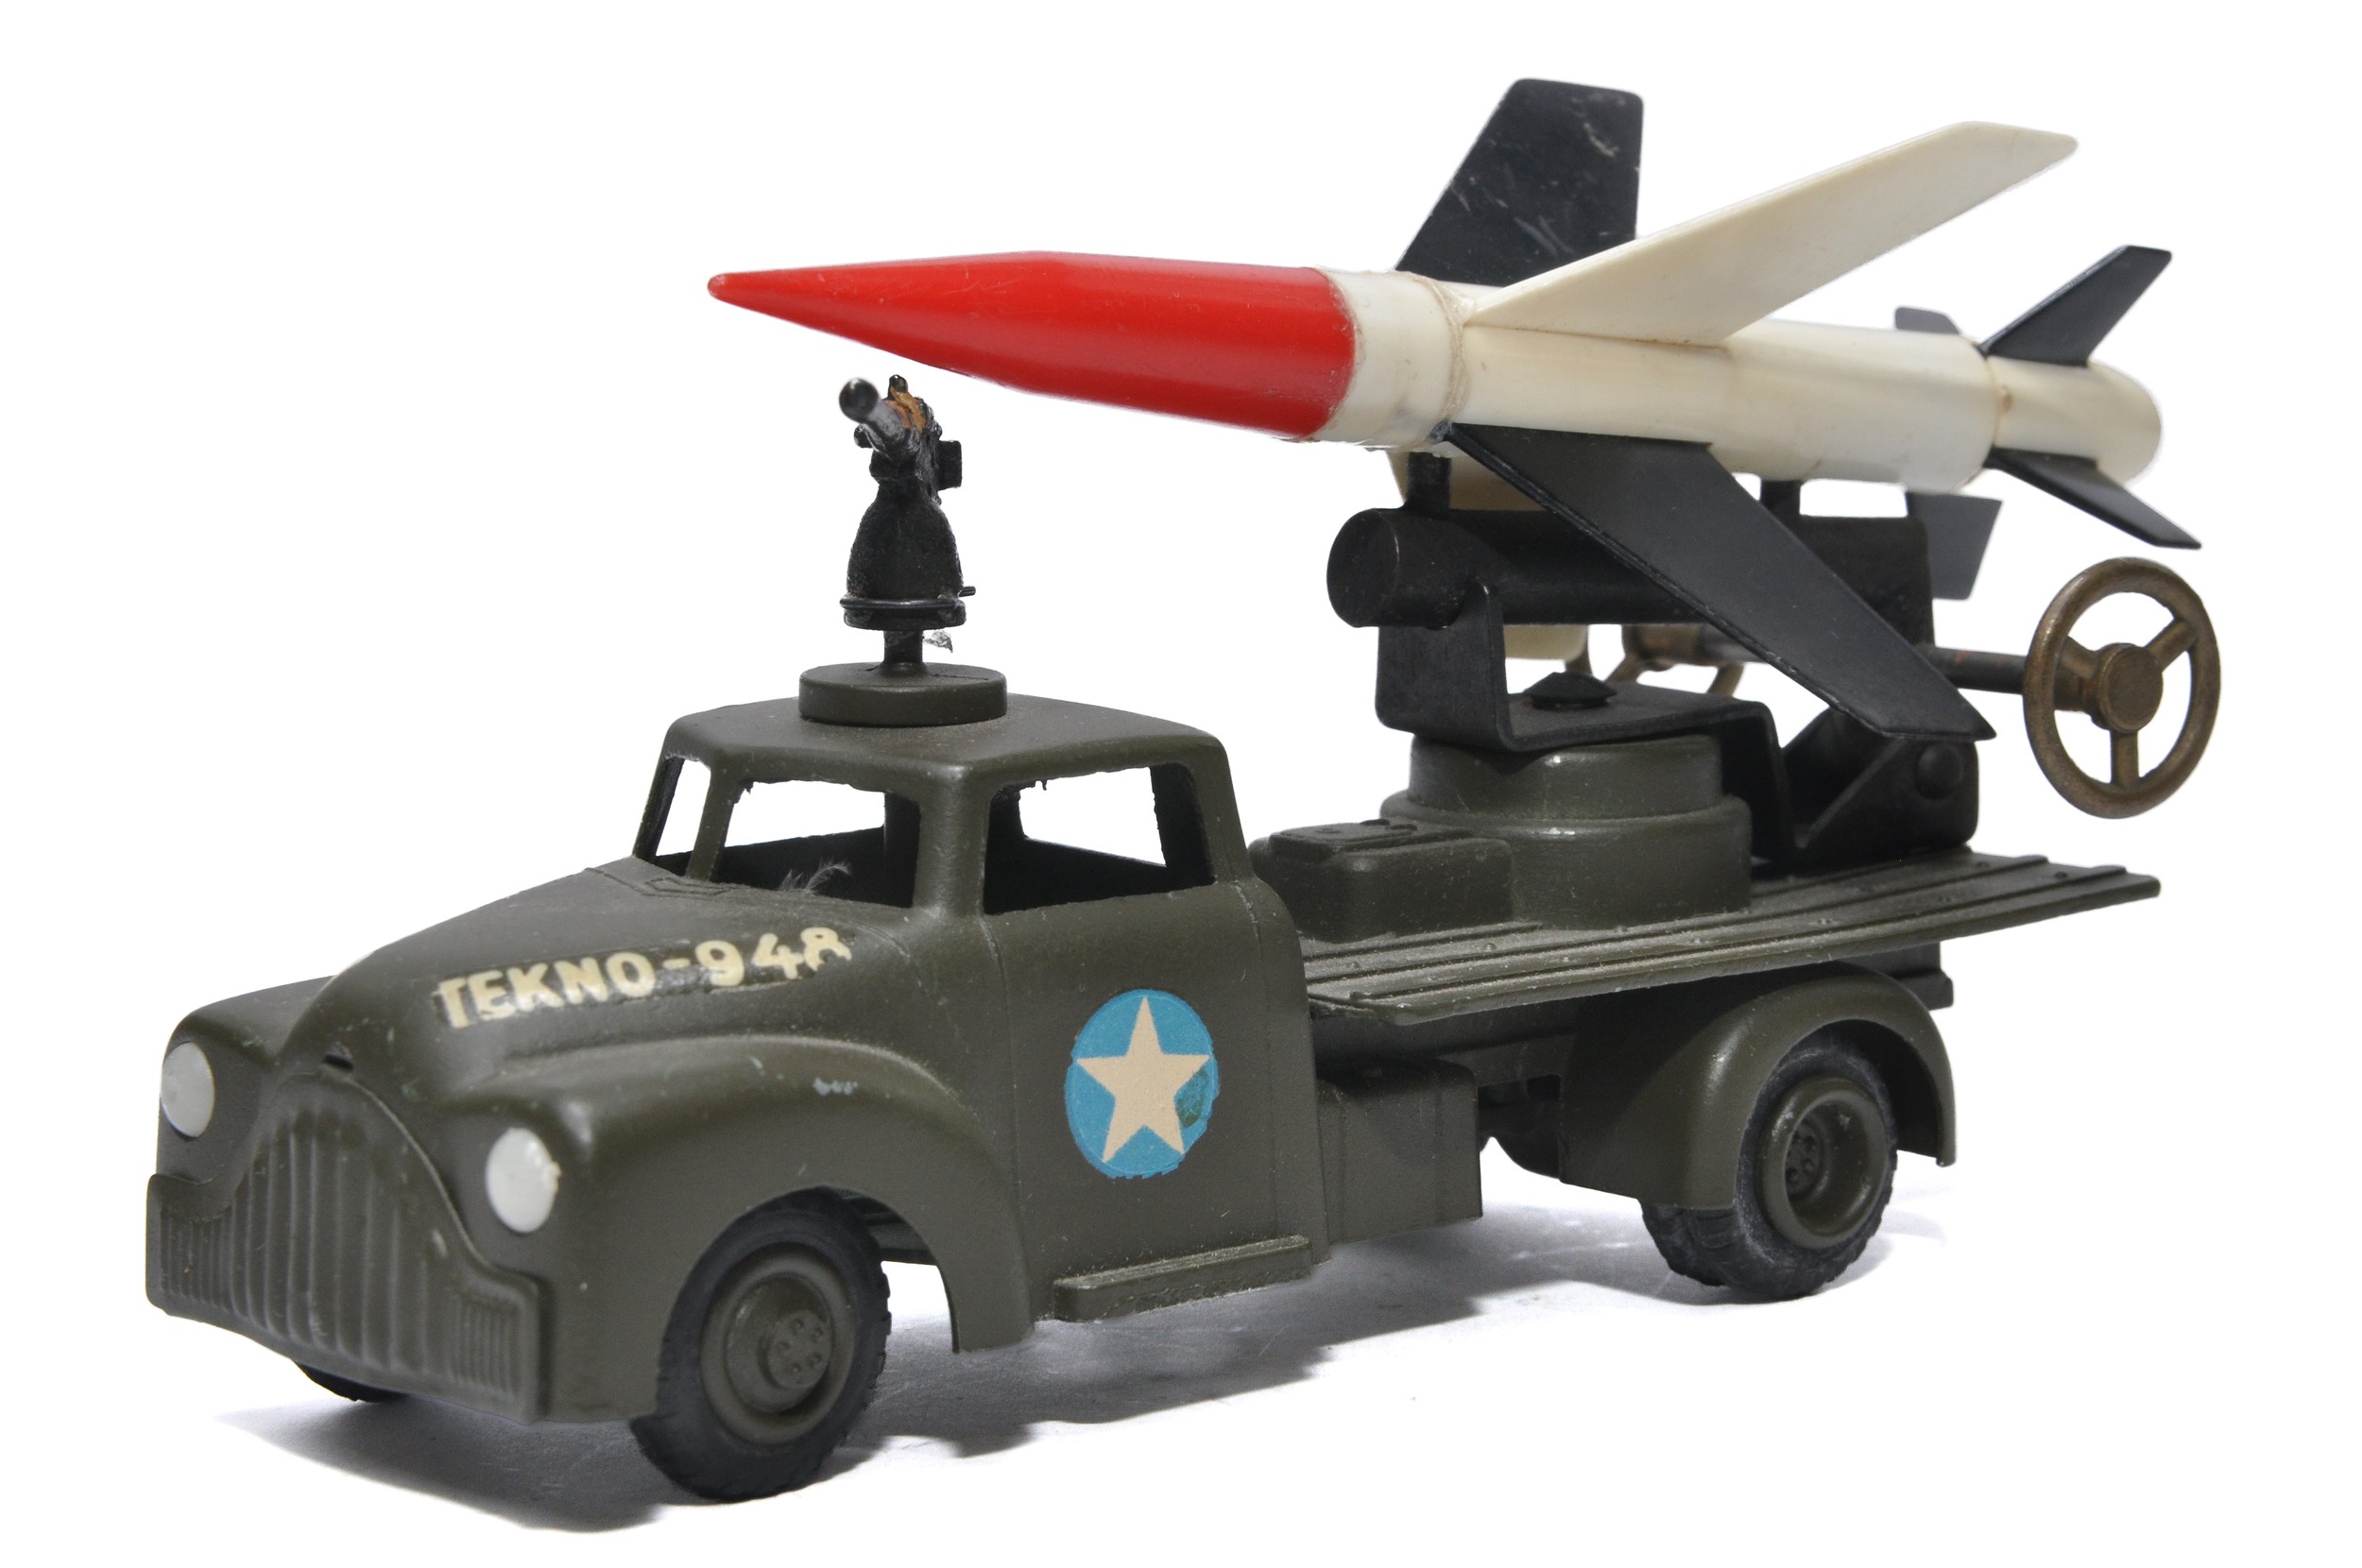 Tekno early issue Rocket Launcher with trio of rockets on back, missing roof gun. Displays good to